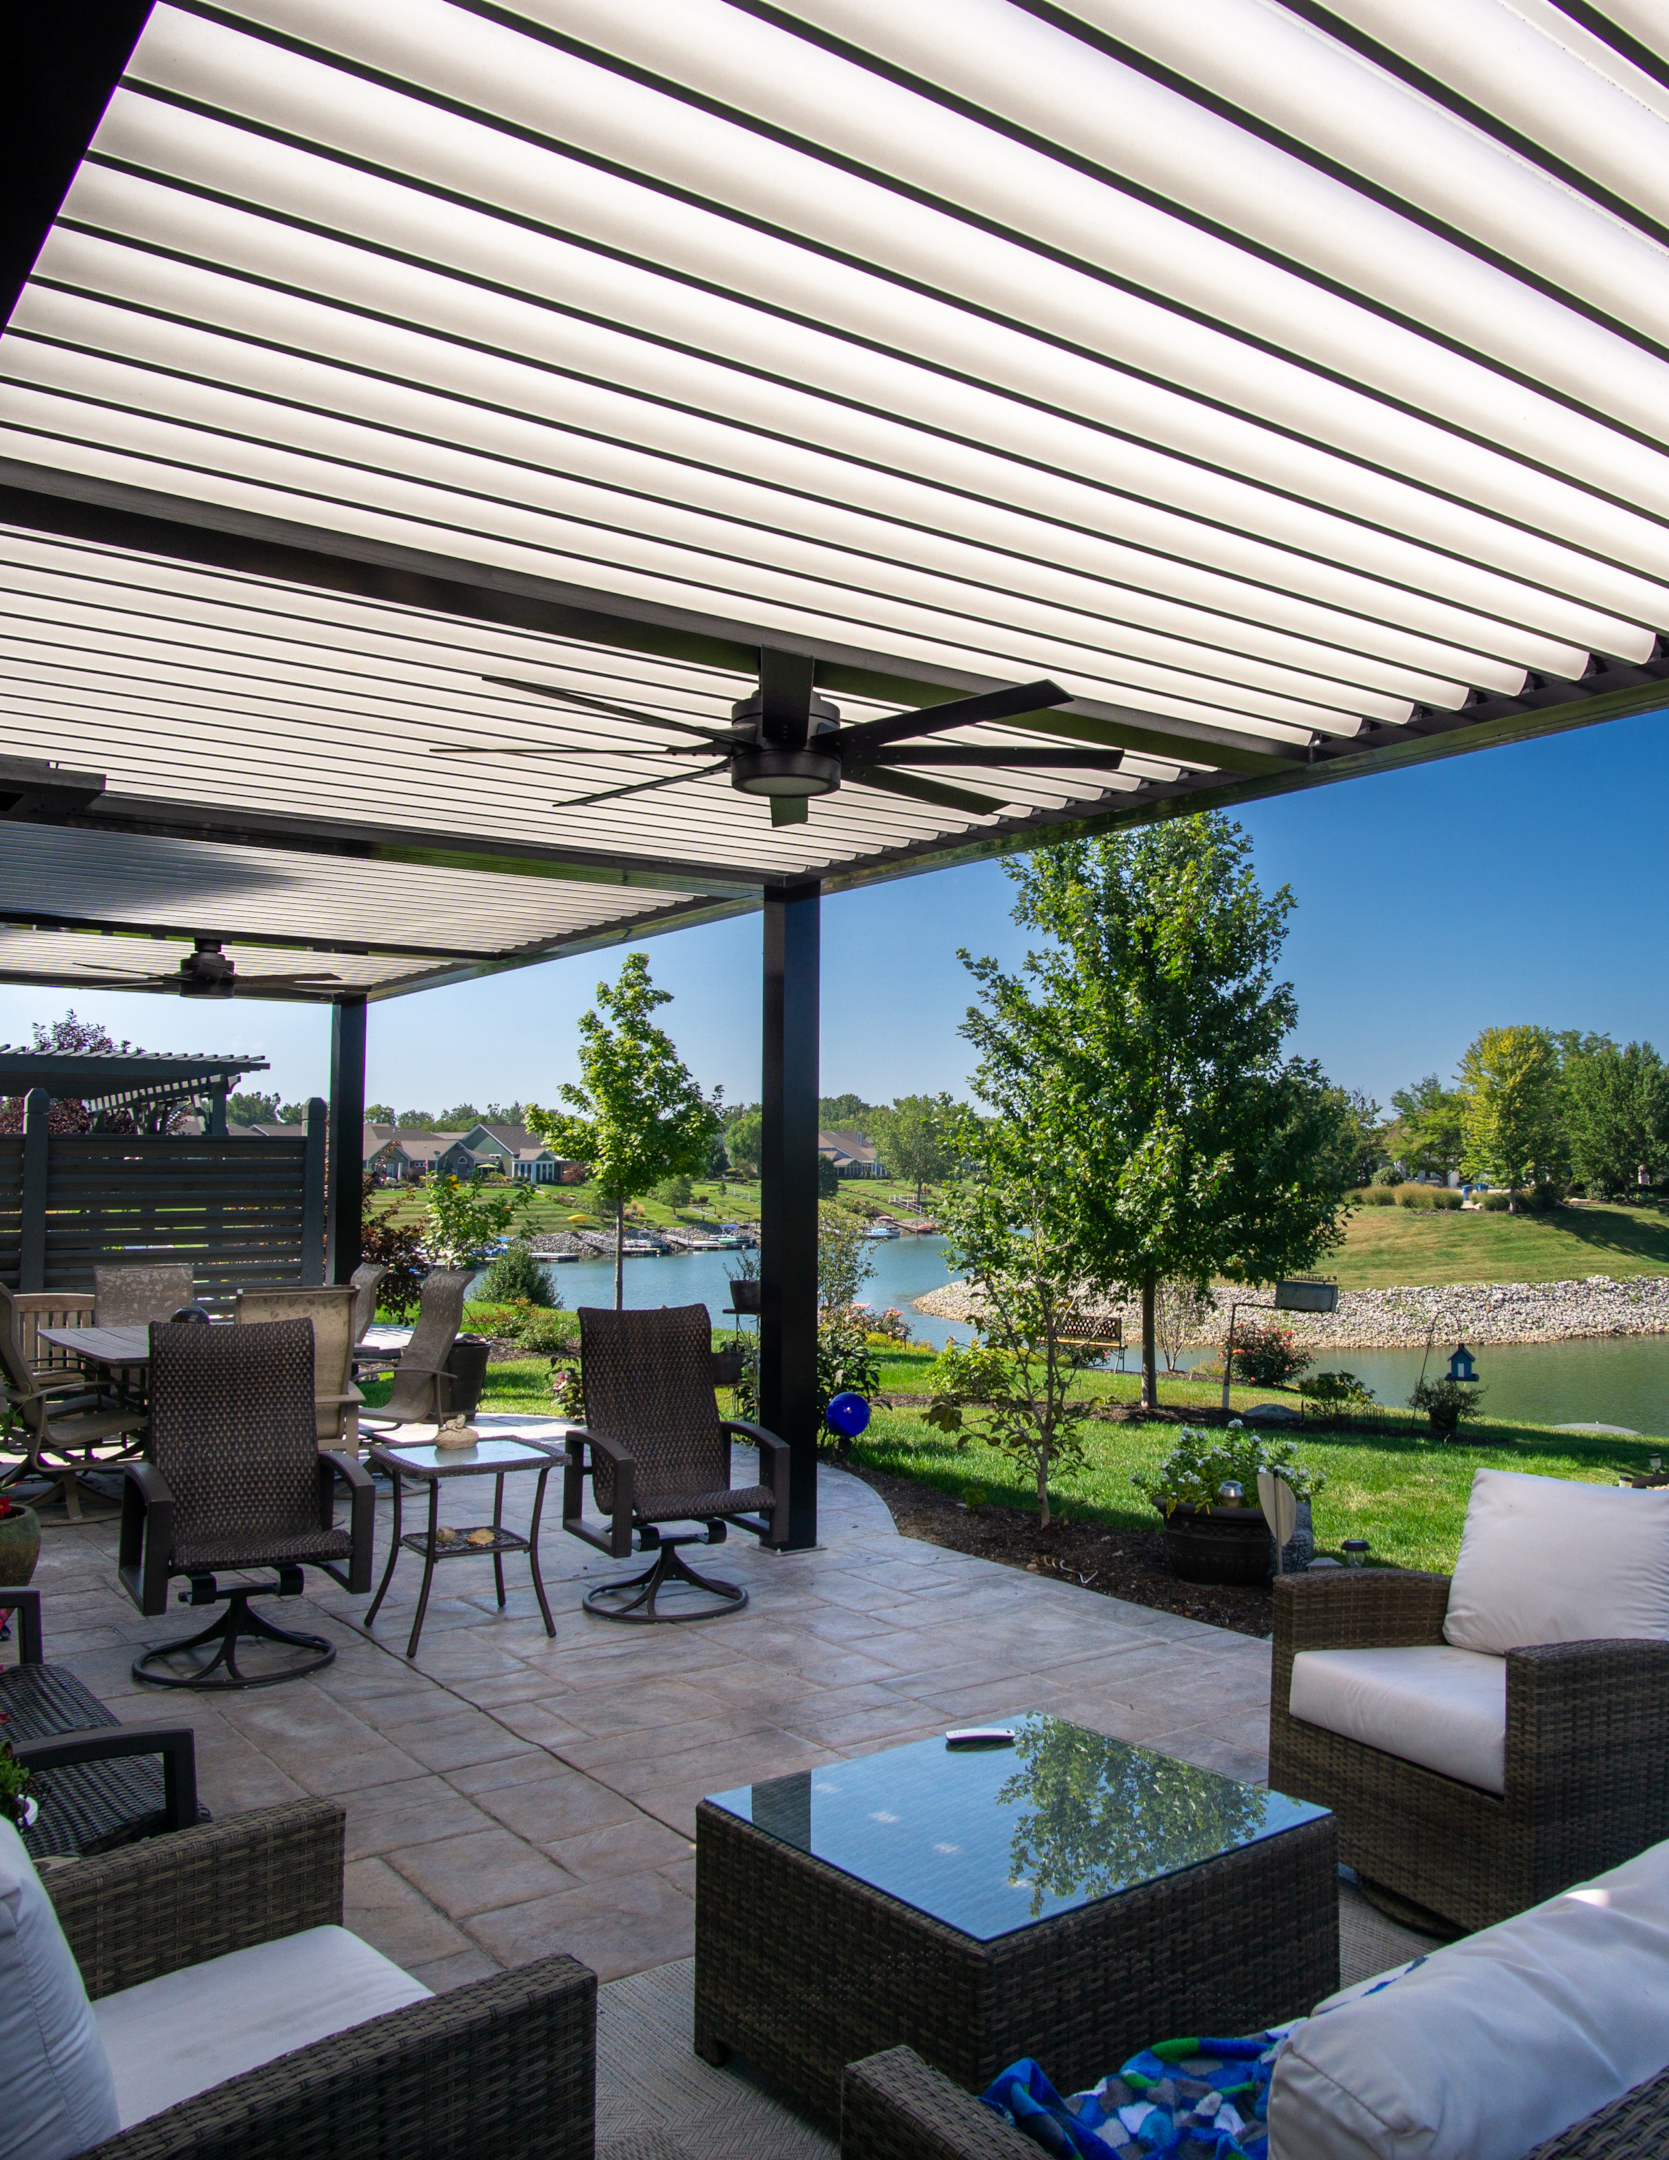 Outdoor Living made better with furniture features under pergola with louvered roof